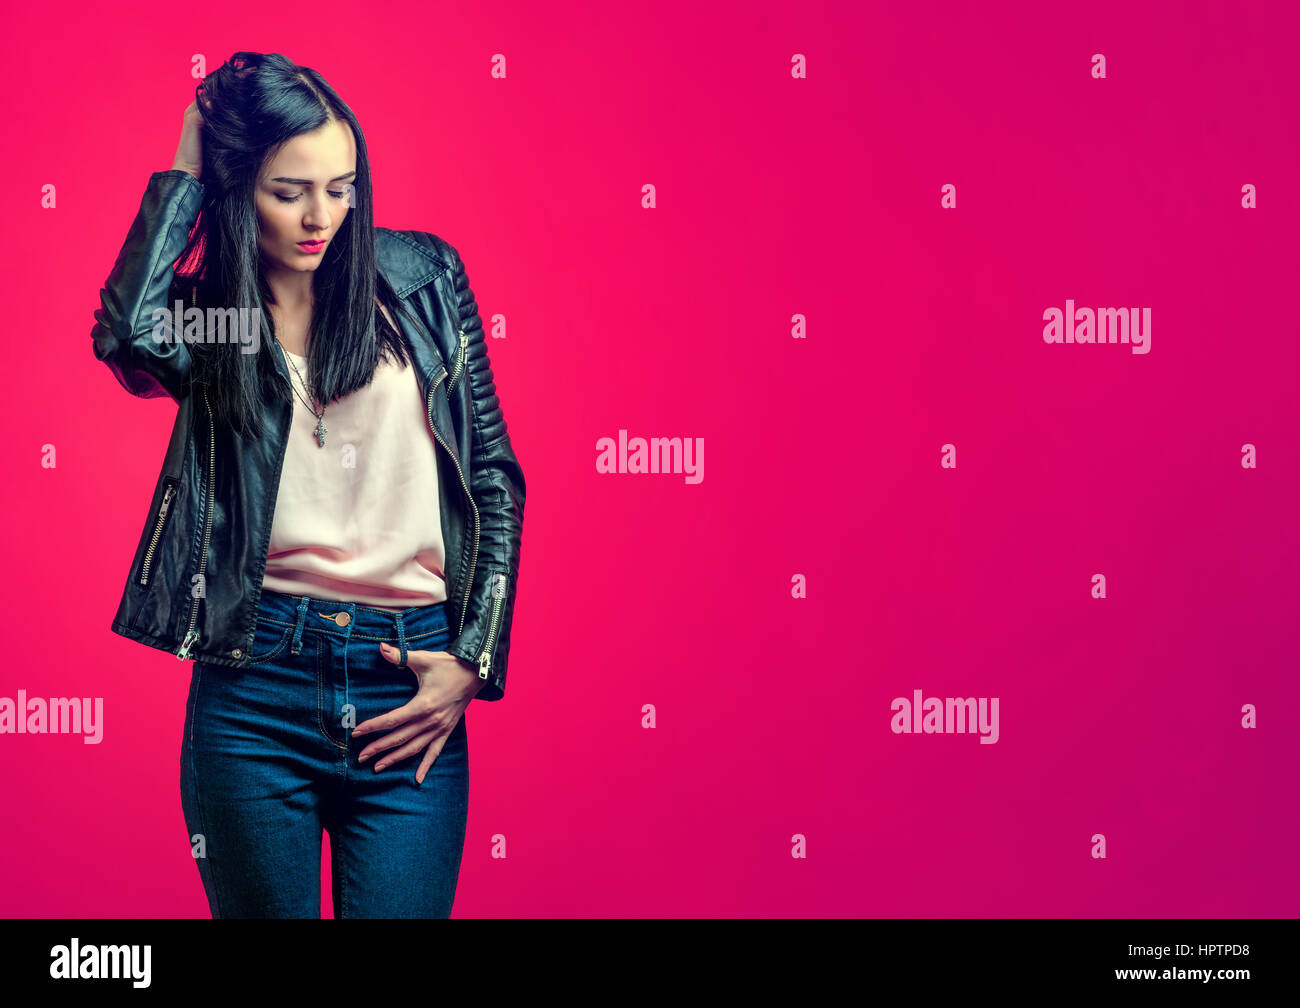 Brooding stylish girl with black hair in a leather jacket and blue jeans on a bright pink background. Stock Photo